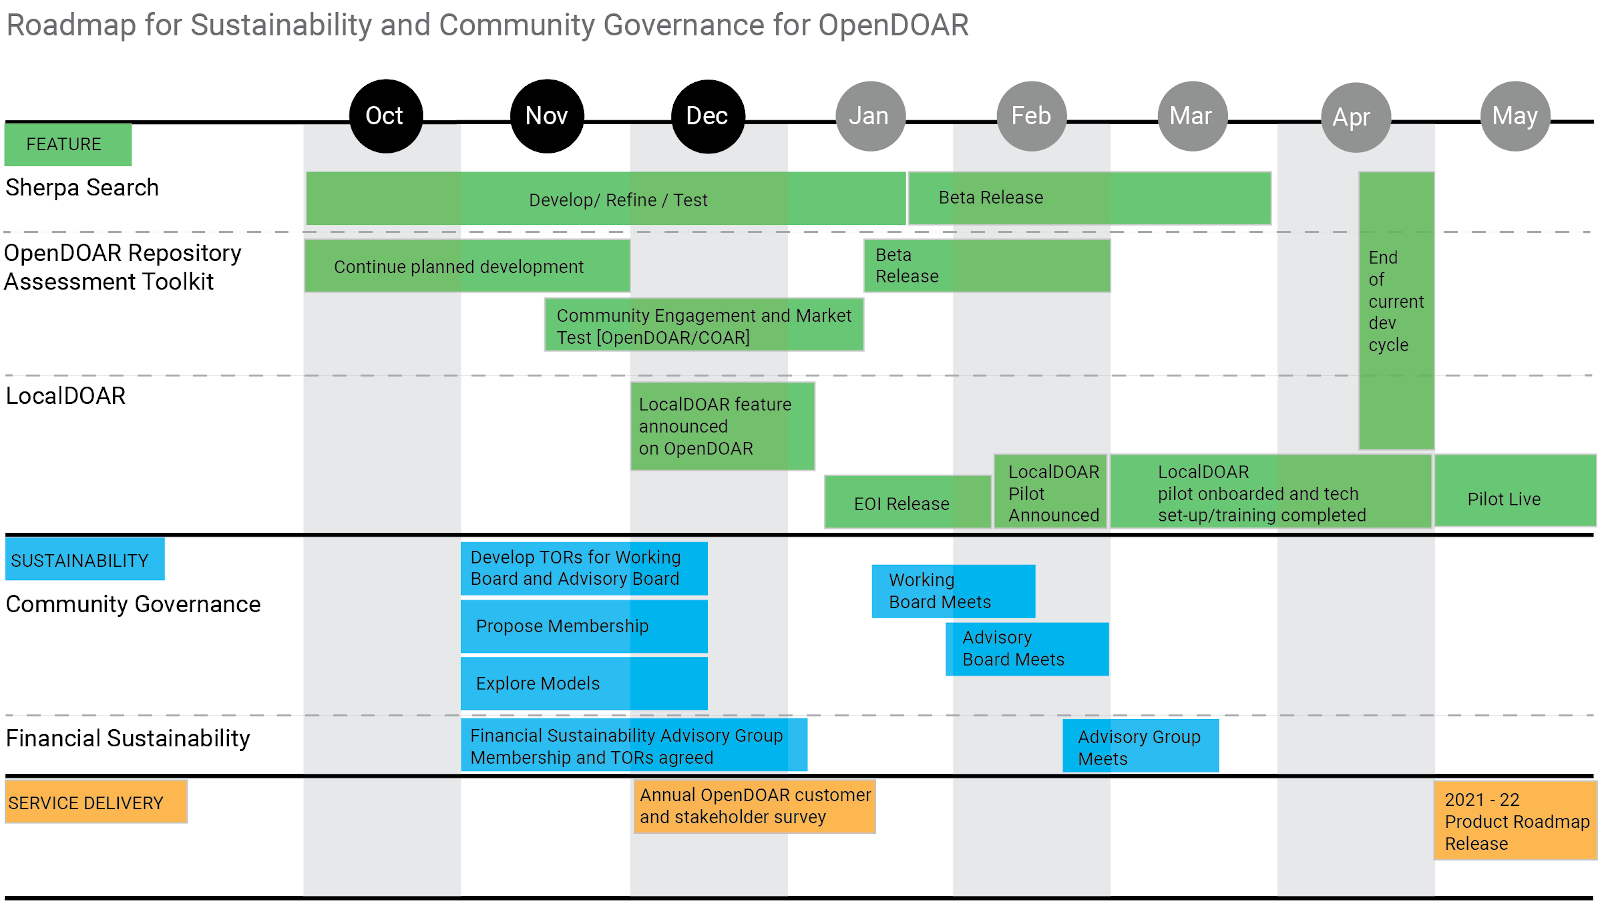 Roadmap for sustainability and community governance for OpenDOAR, including planned features, collaboration, preparations and service delivery.  This covers the period of October 2020 until May 2021.